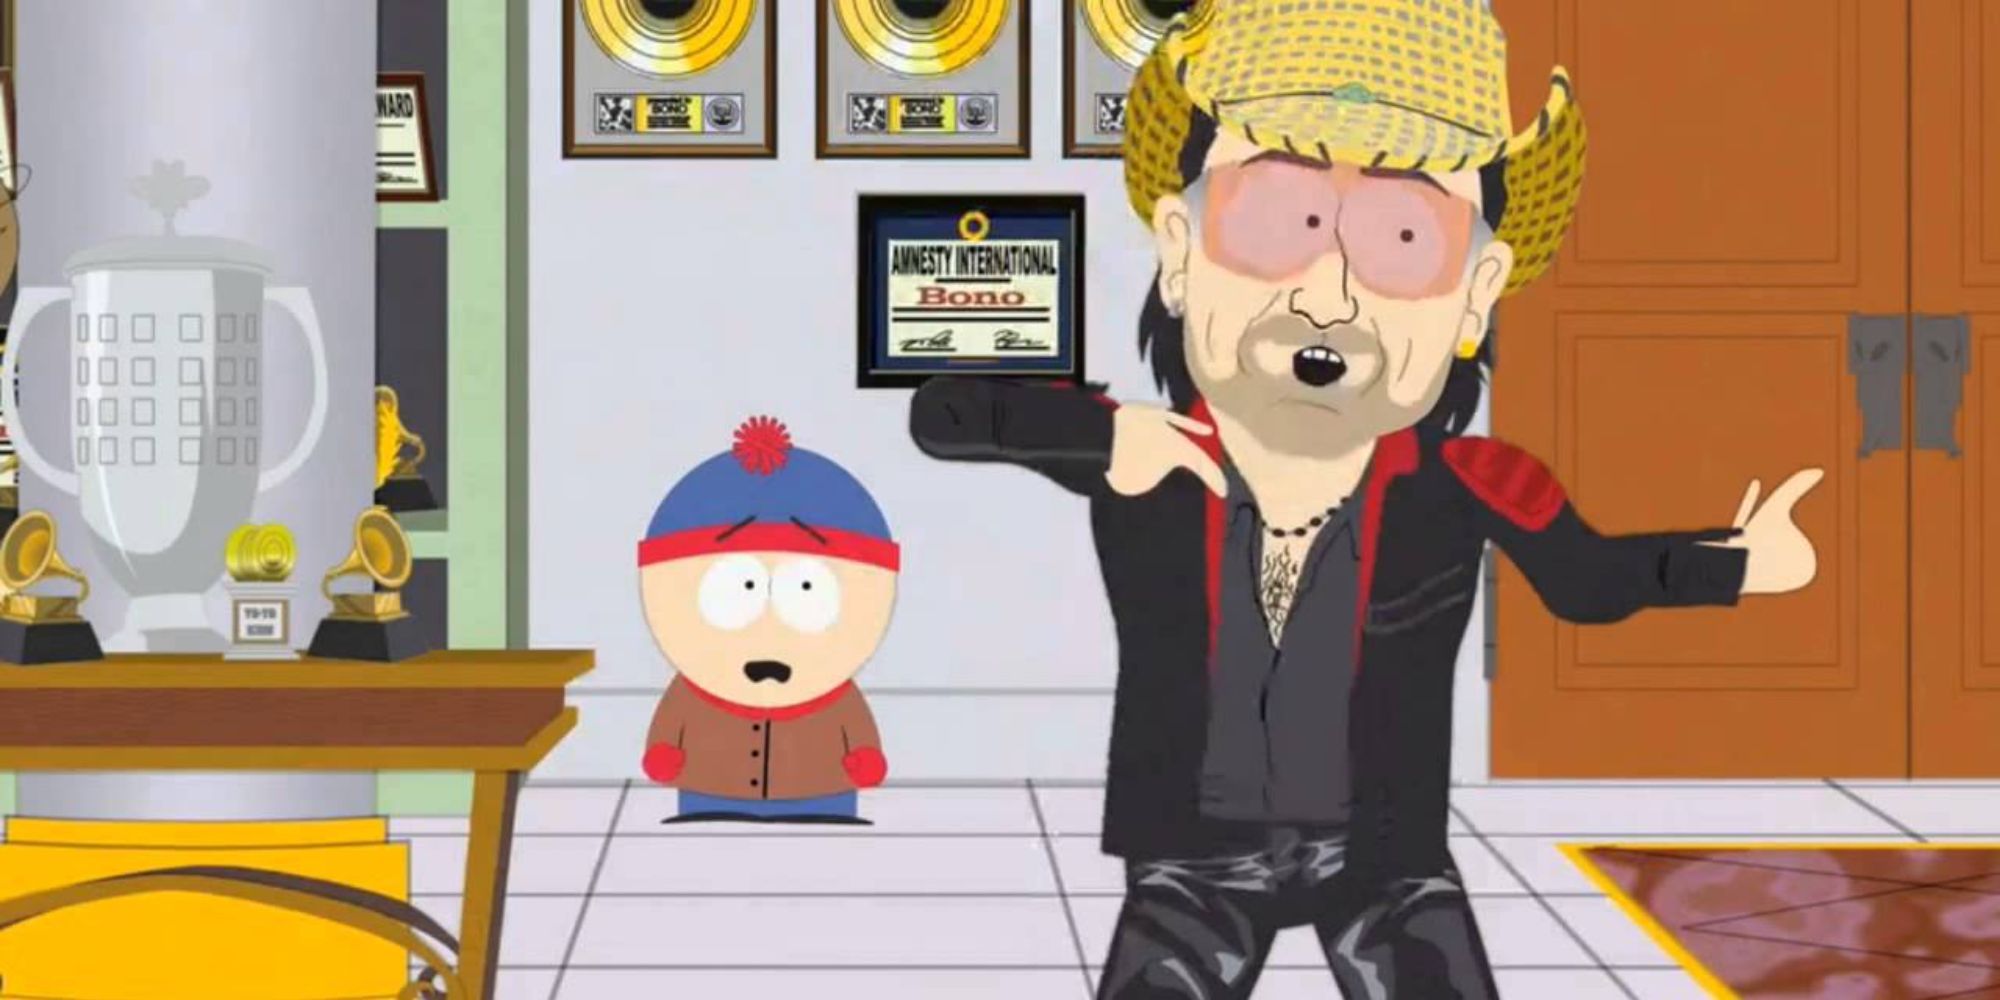 Bono worries about Stan in South Park